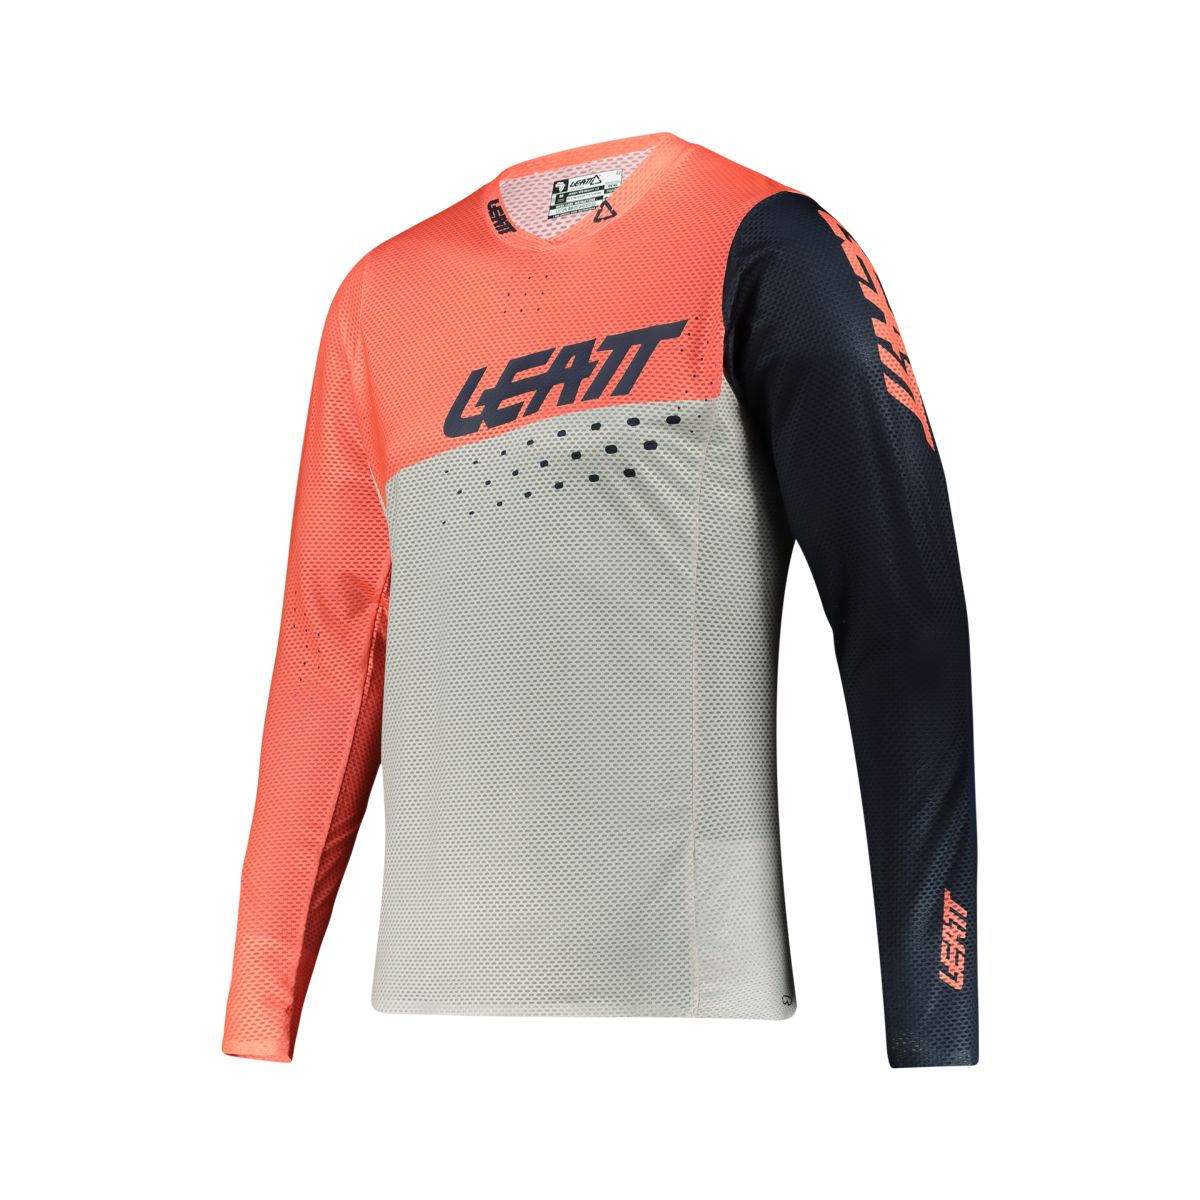 Leatt Apparel Jersey Mtb 4.0 Gravity Coral M in Coral